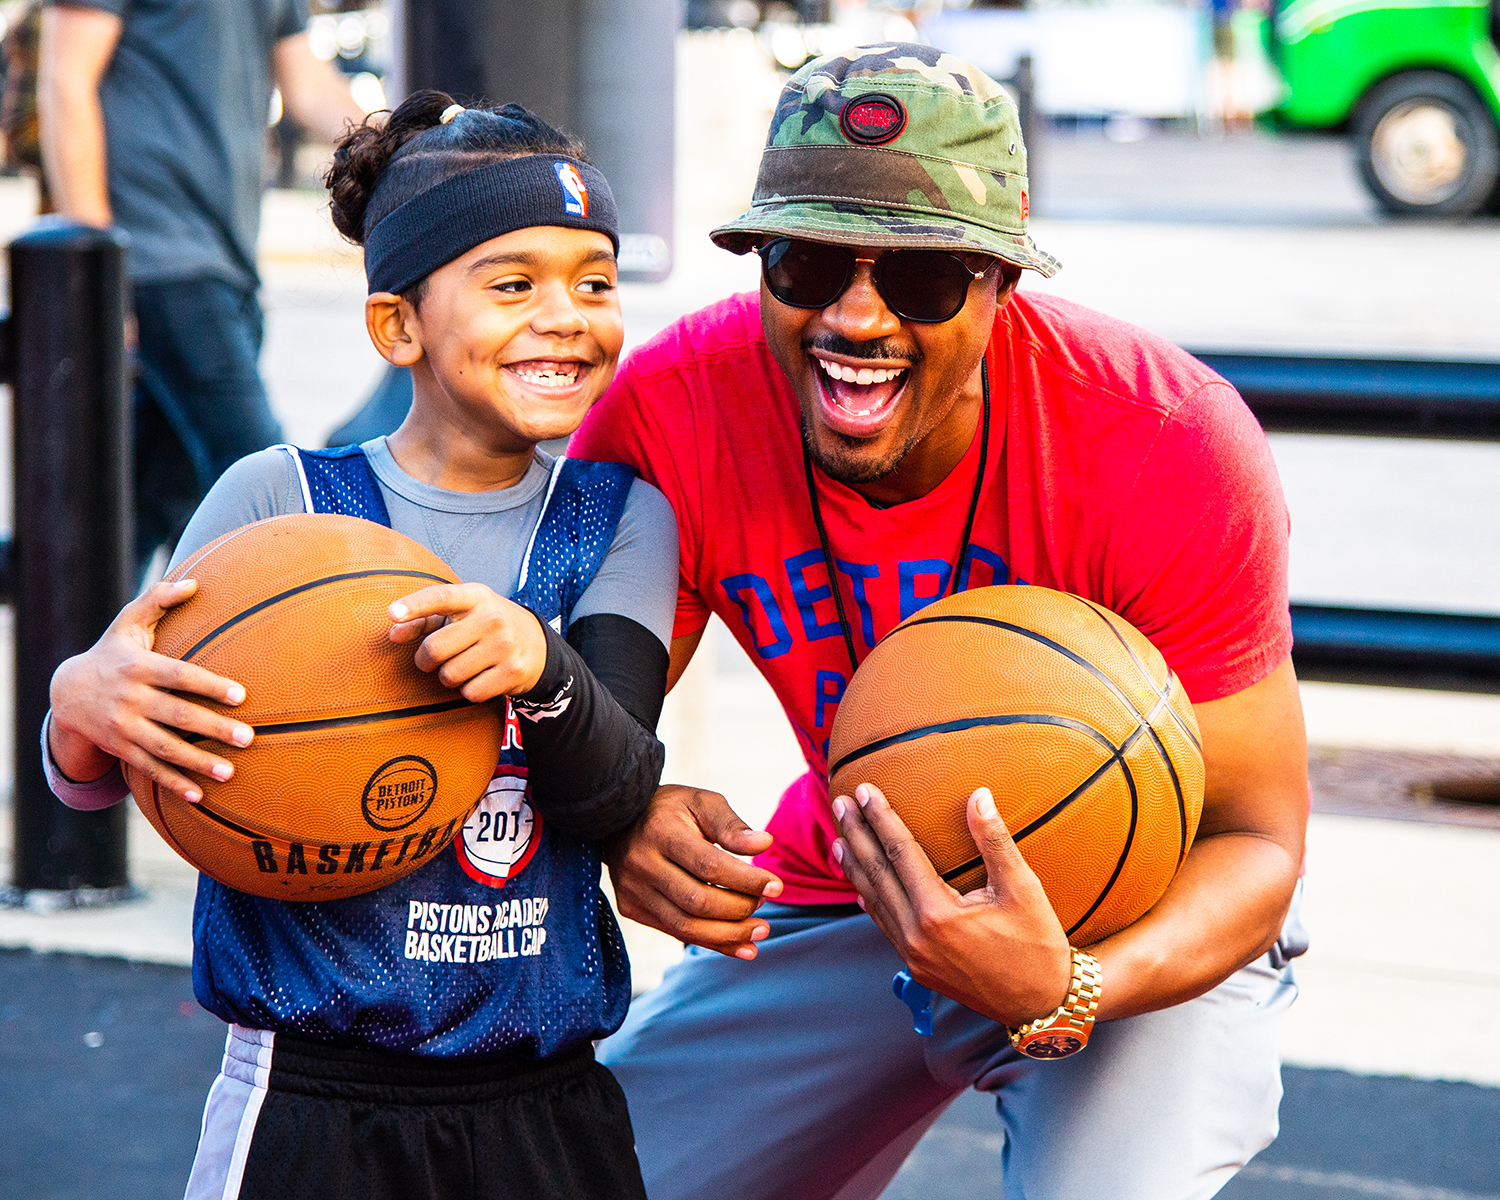 A basketball coach poses with a young fan.